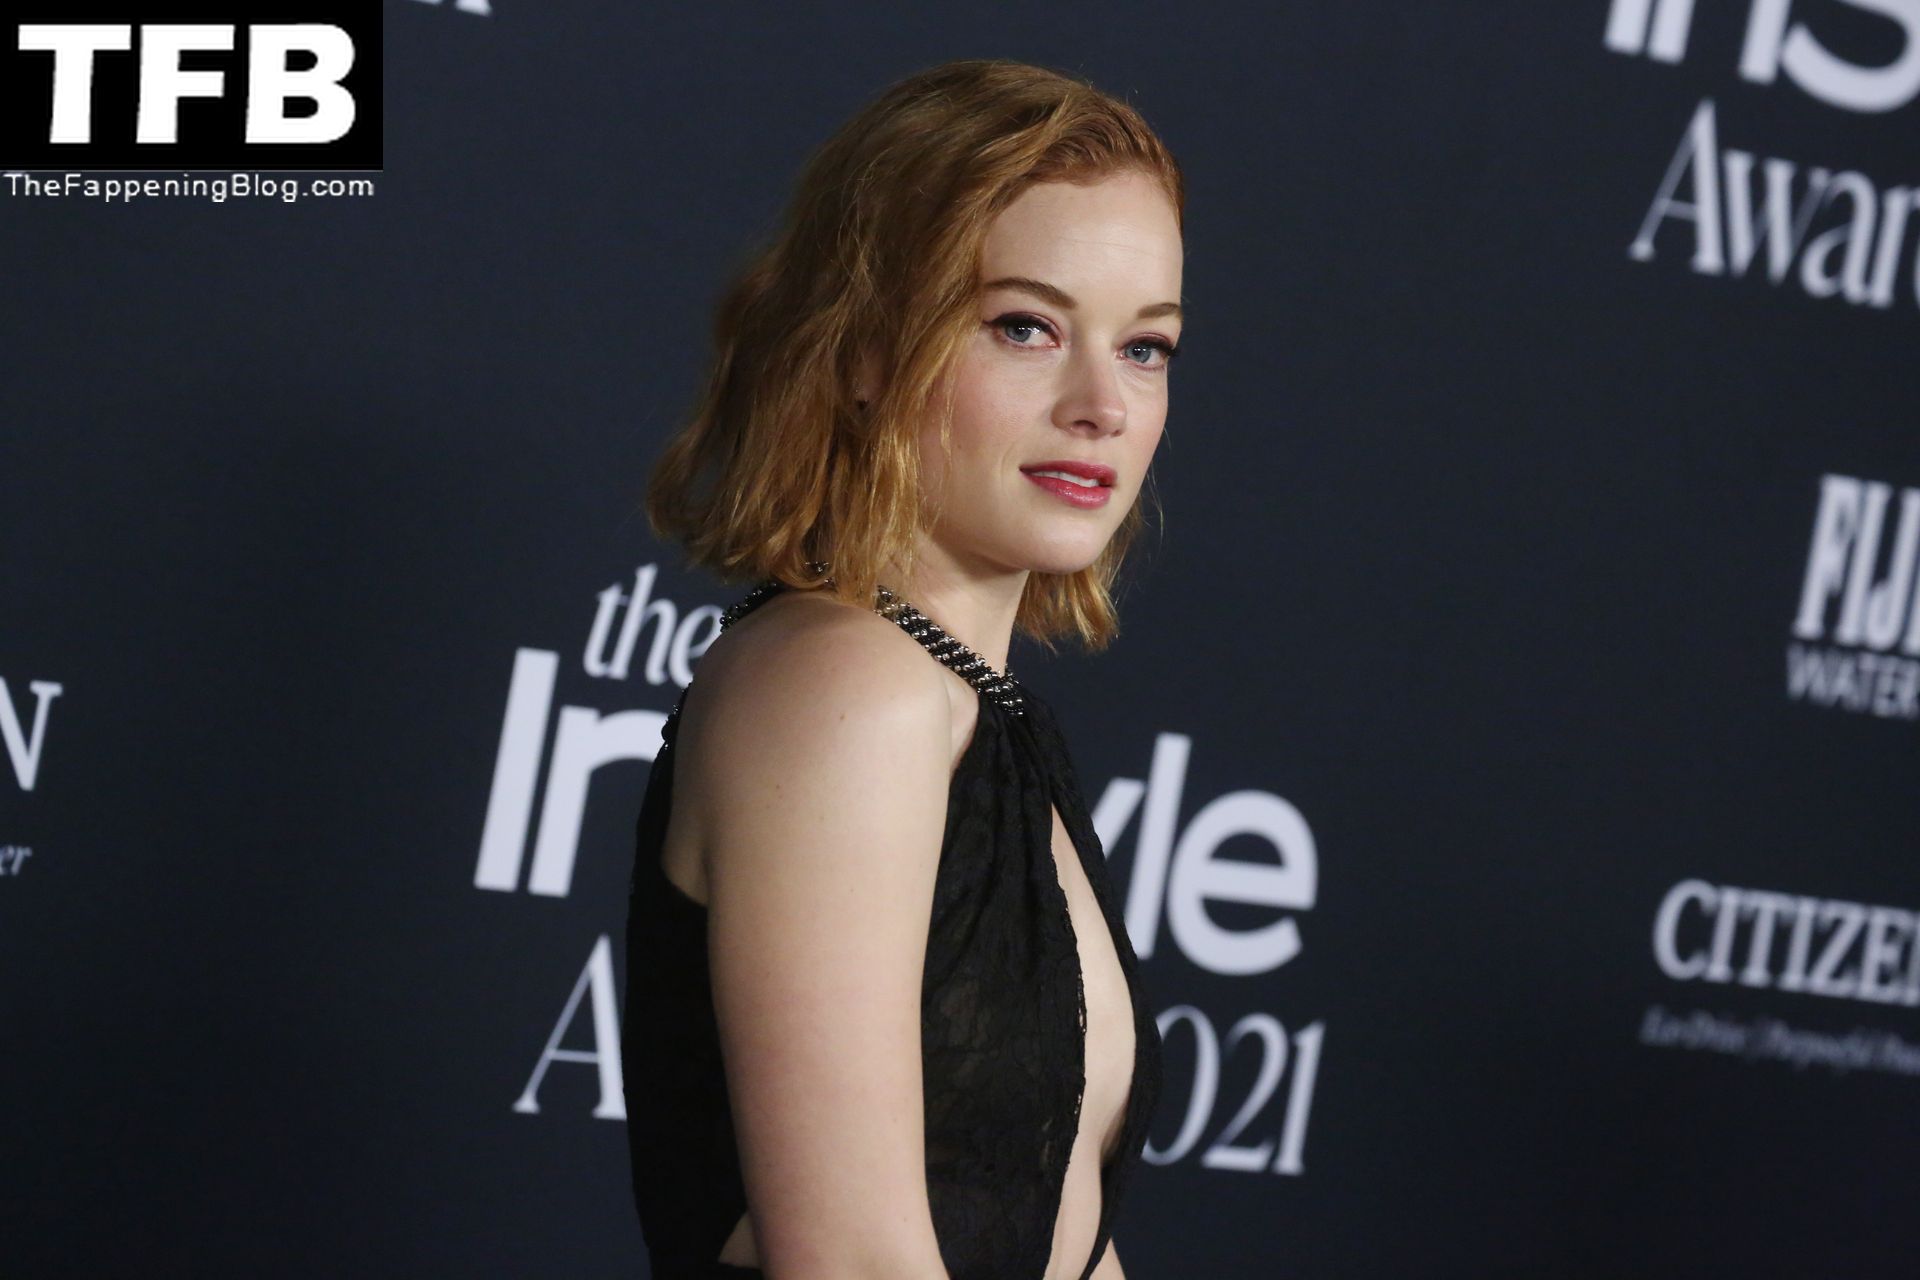 Jane-Levy-See-Through-The-Fappening-Blog-11.jpg